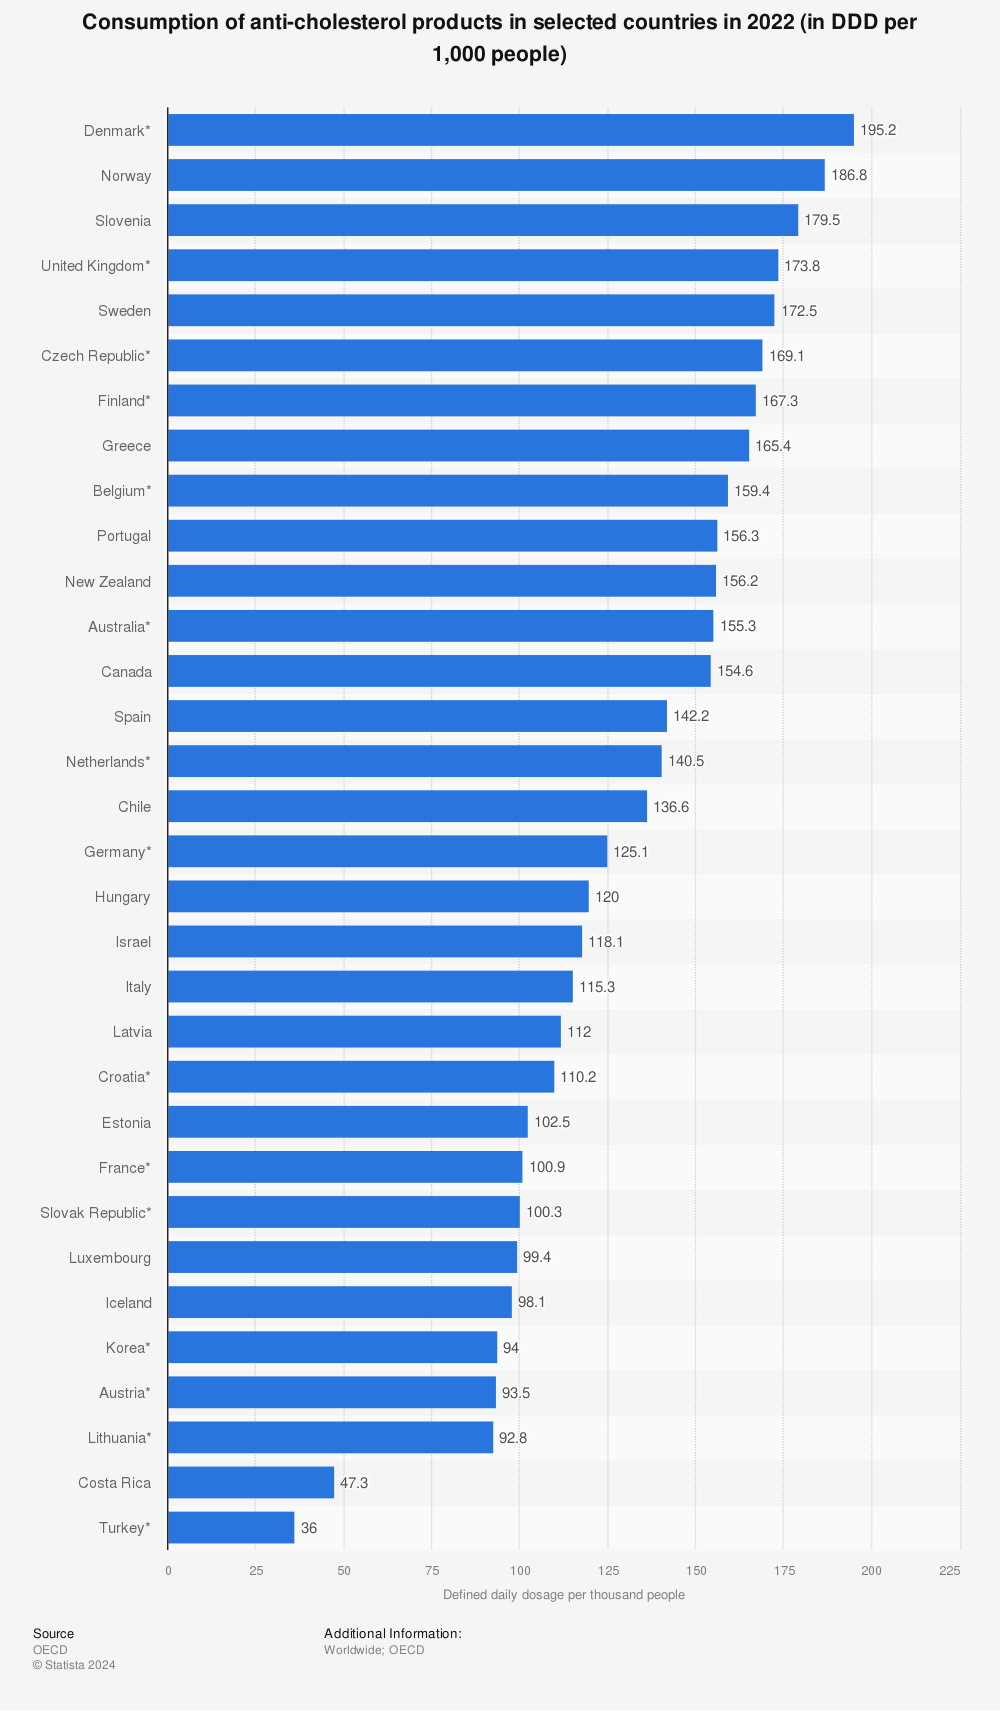 Statistic: Consumption of anti-cholesterol products in selected countries in 2022 (in DDD per 1,000 people) | Statista